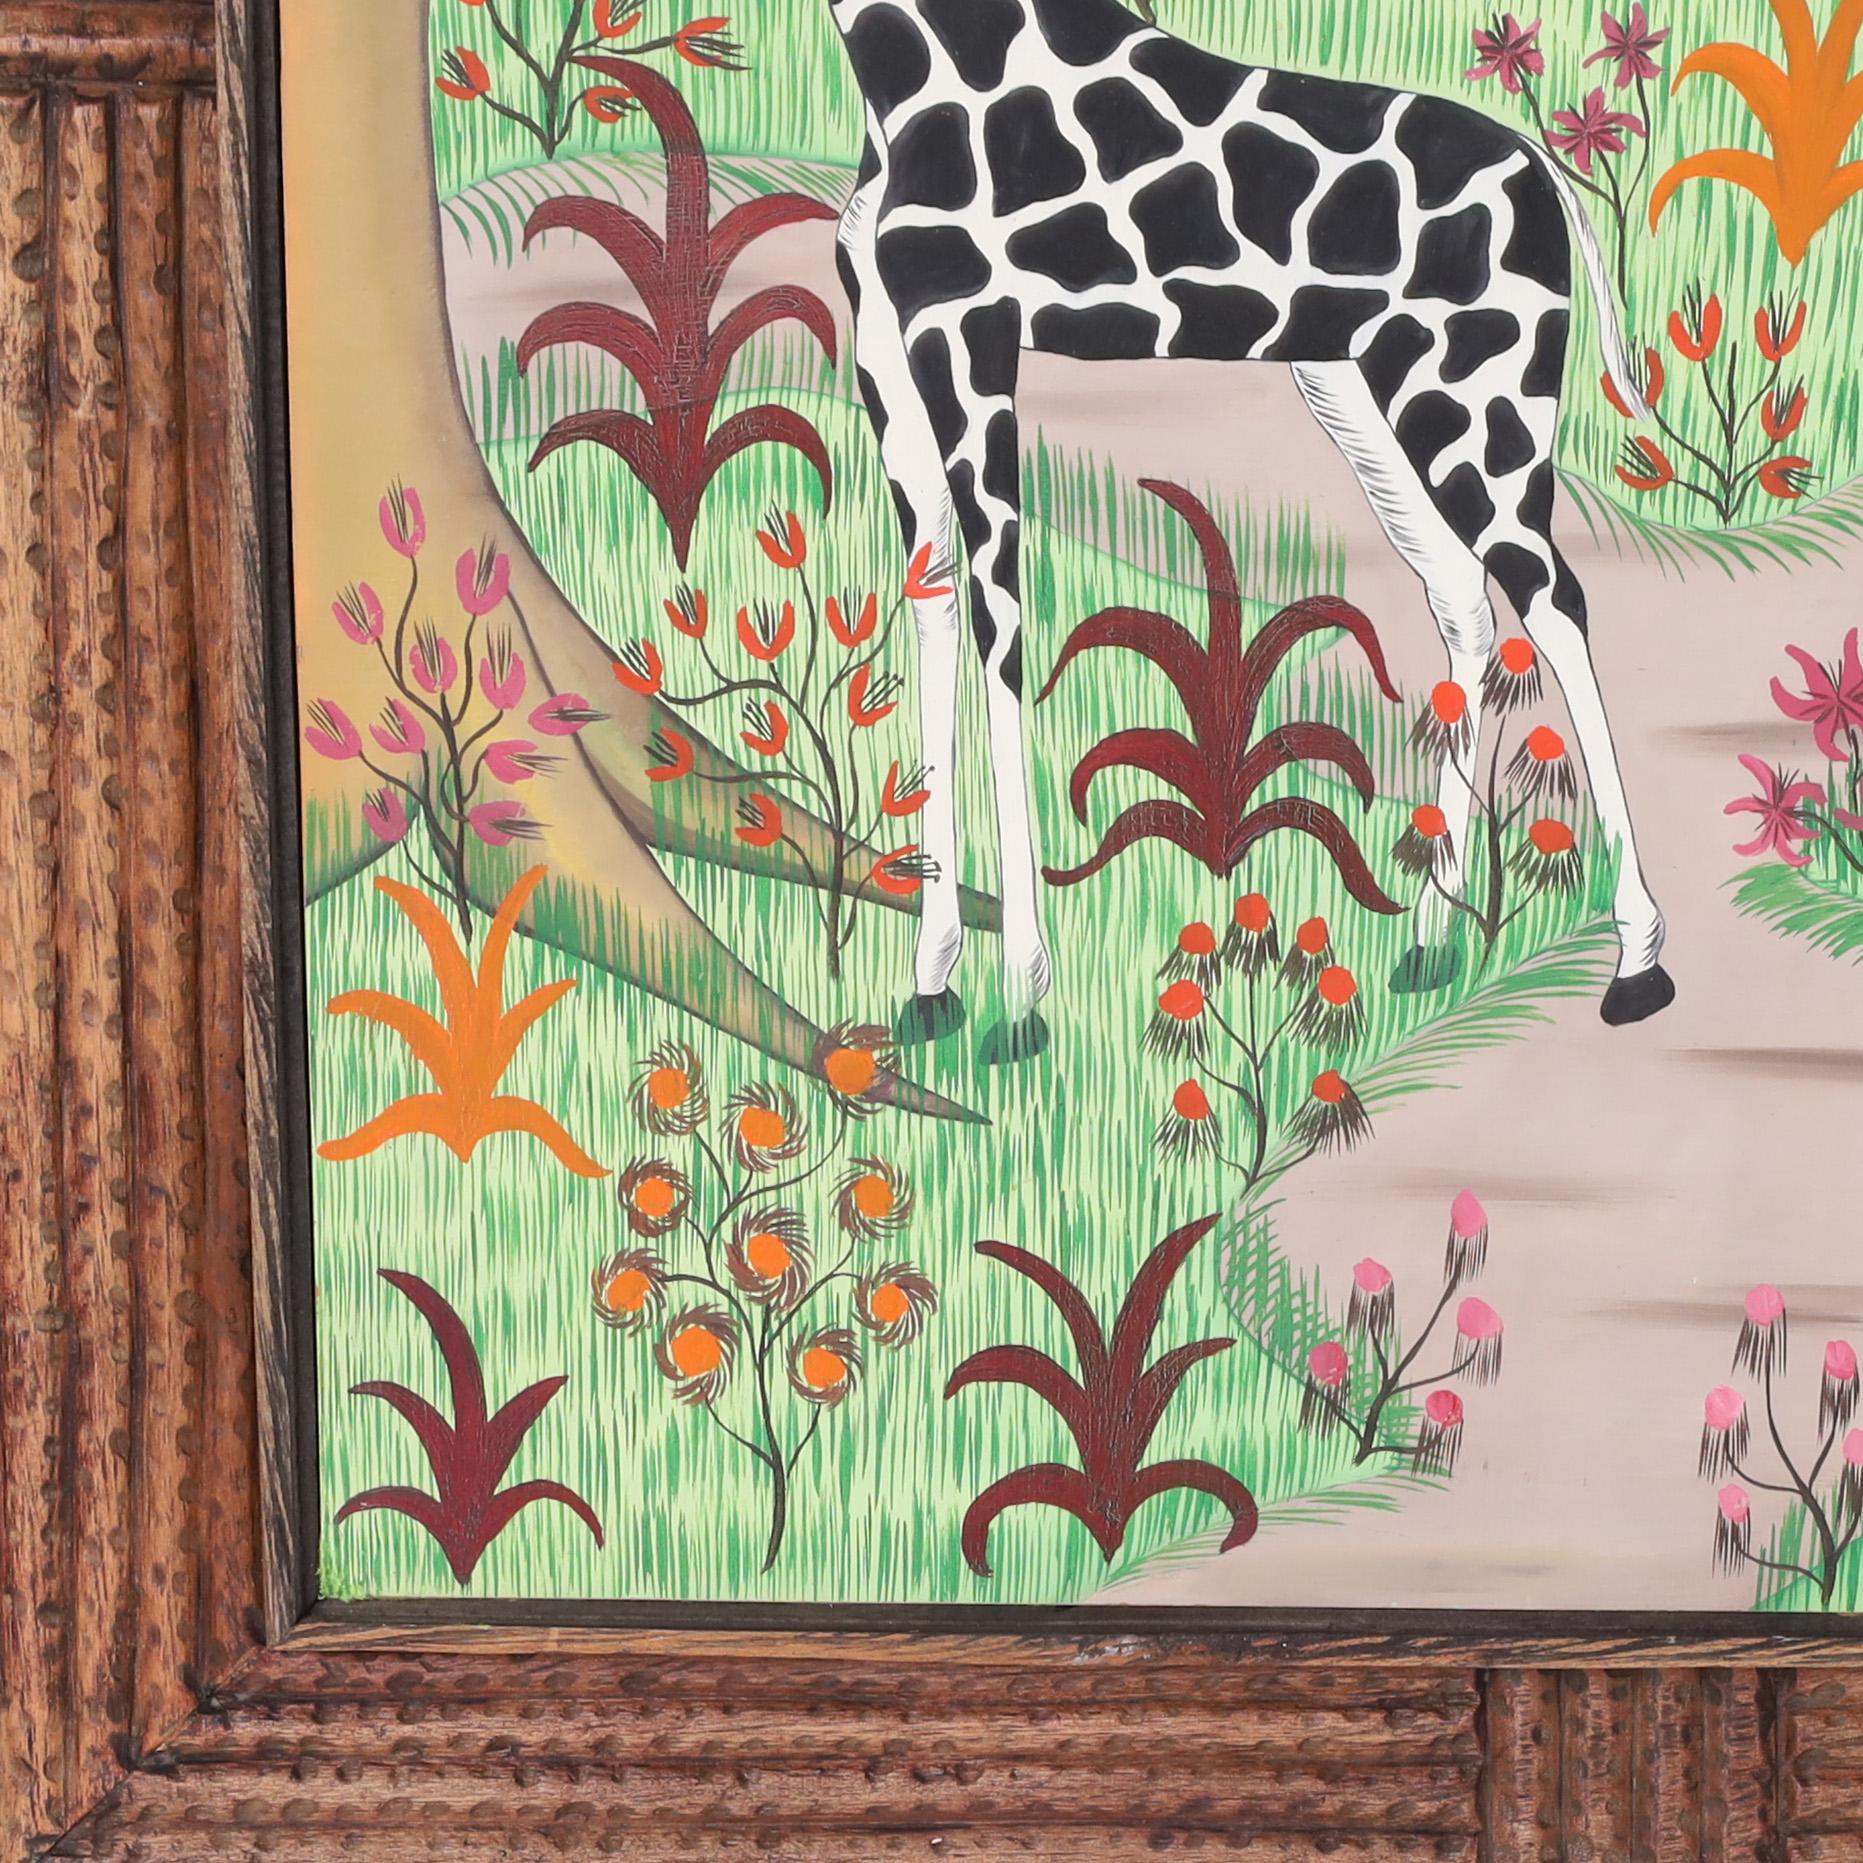 Haitian Painting of Giraffes In Good Condition For Sale In Palm Beach, FL